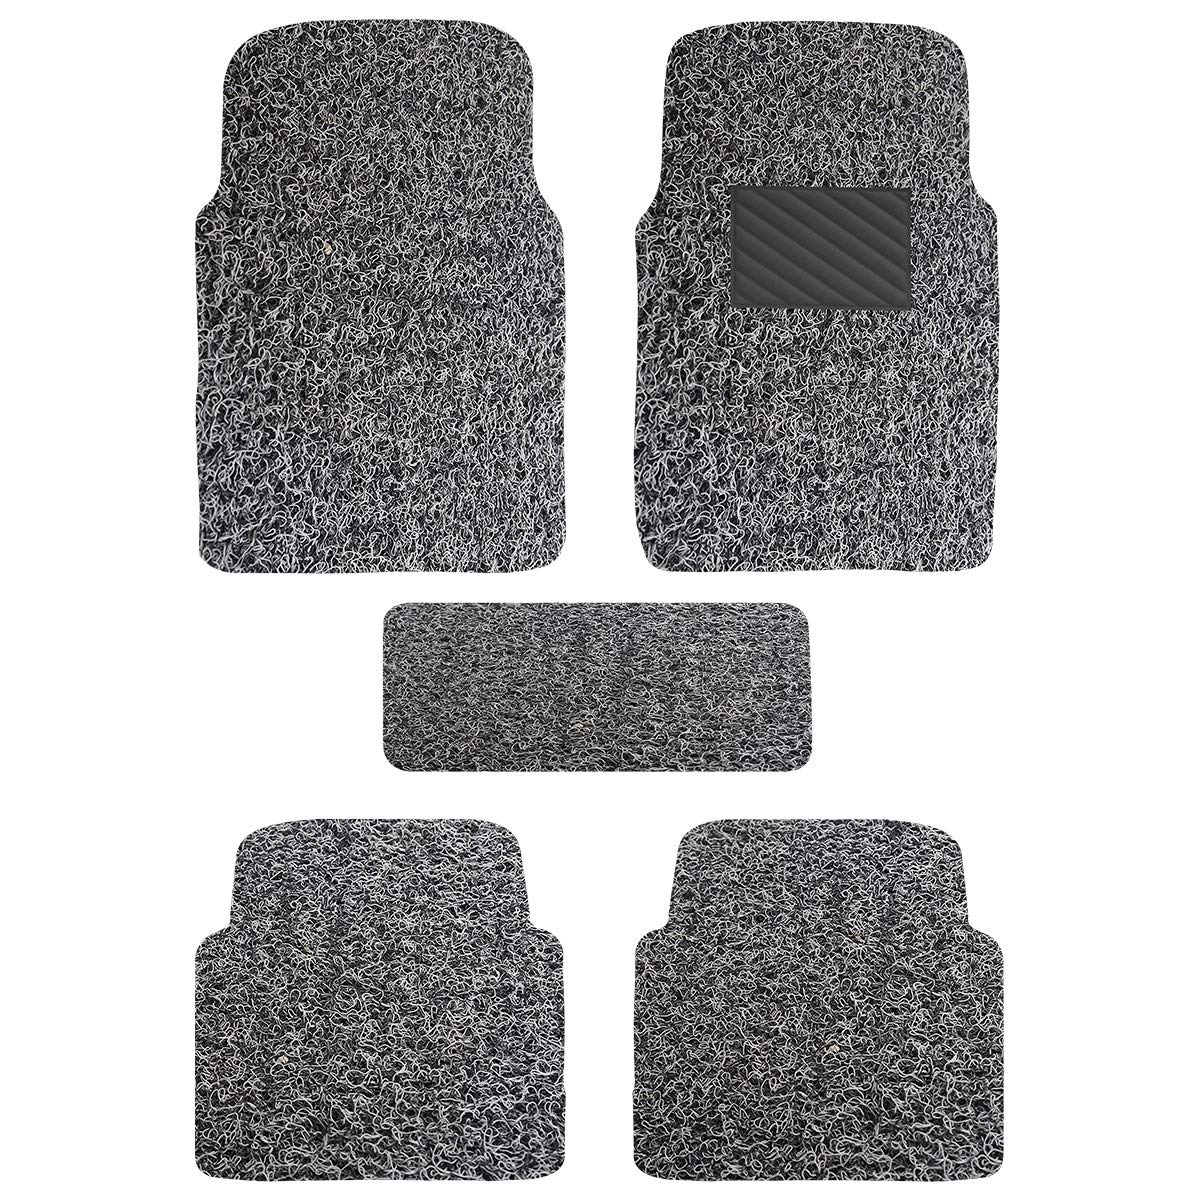 Curly Car Foot Mat, Superior Powerful Dirt Trapping Capacity, All Weather Resistant, Heavy Duty, UNIVERSAL FIT (12mm, 2 Rows)